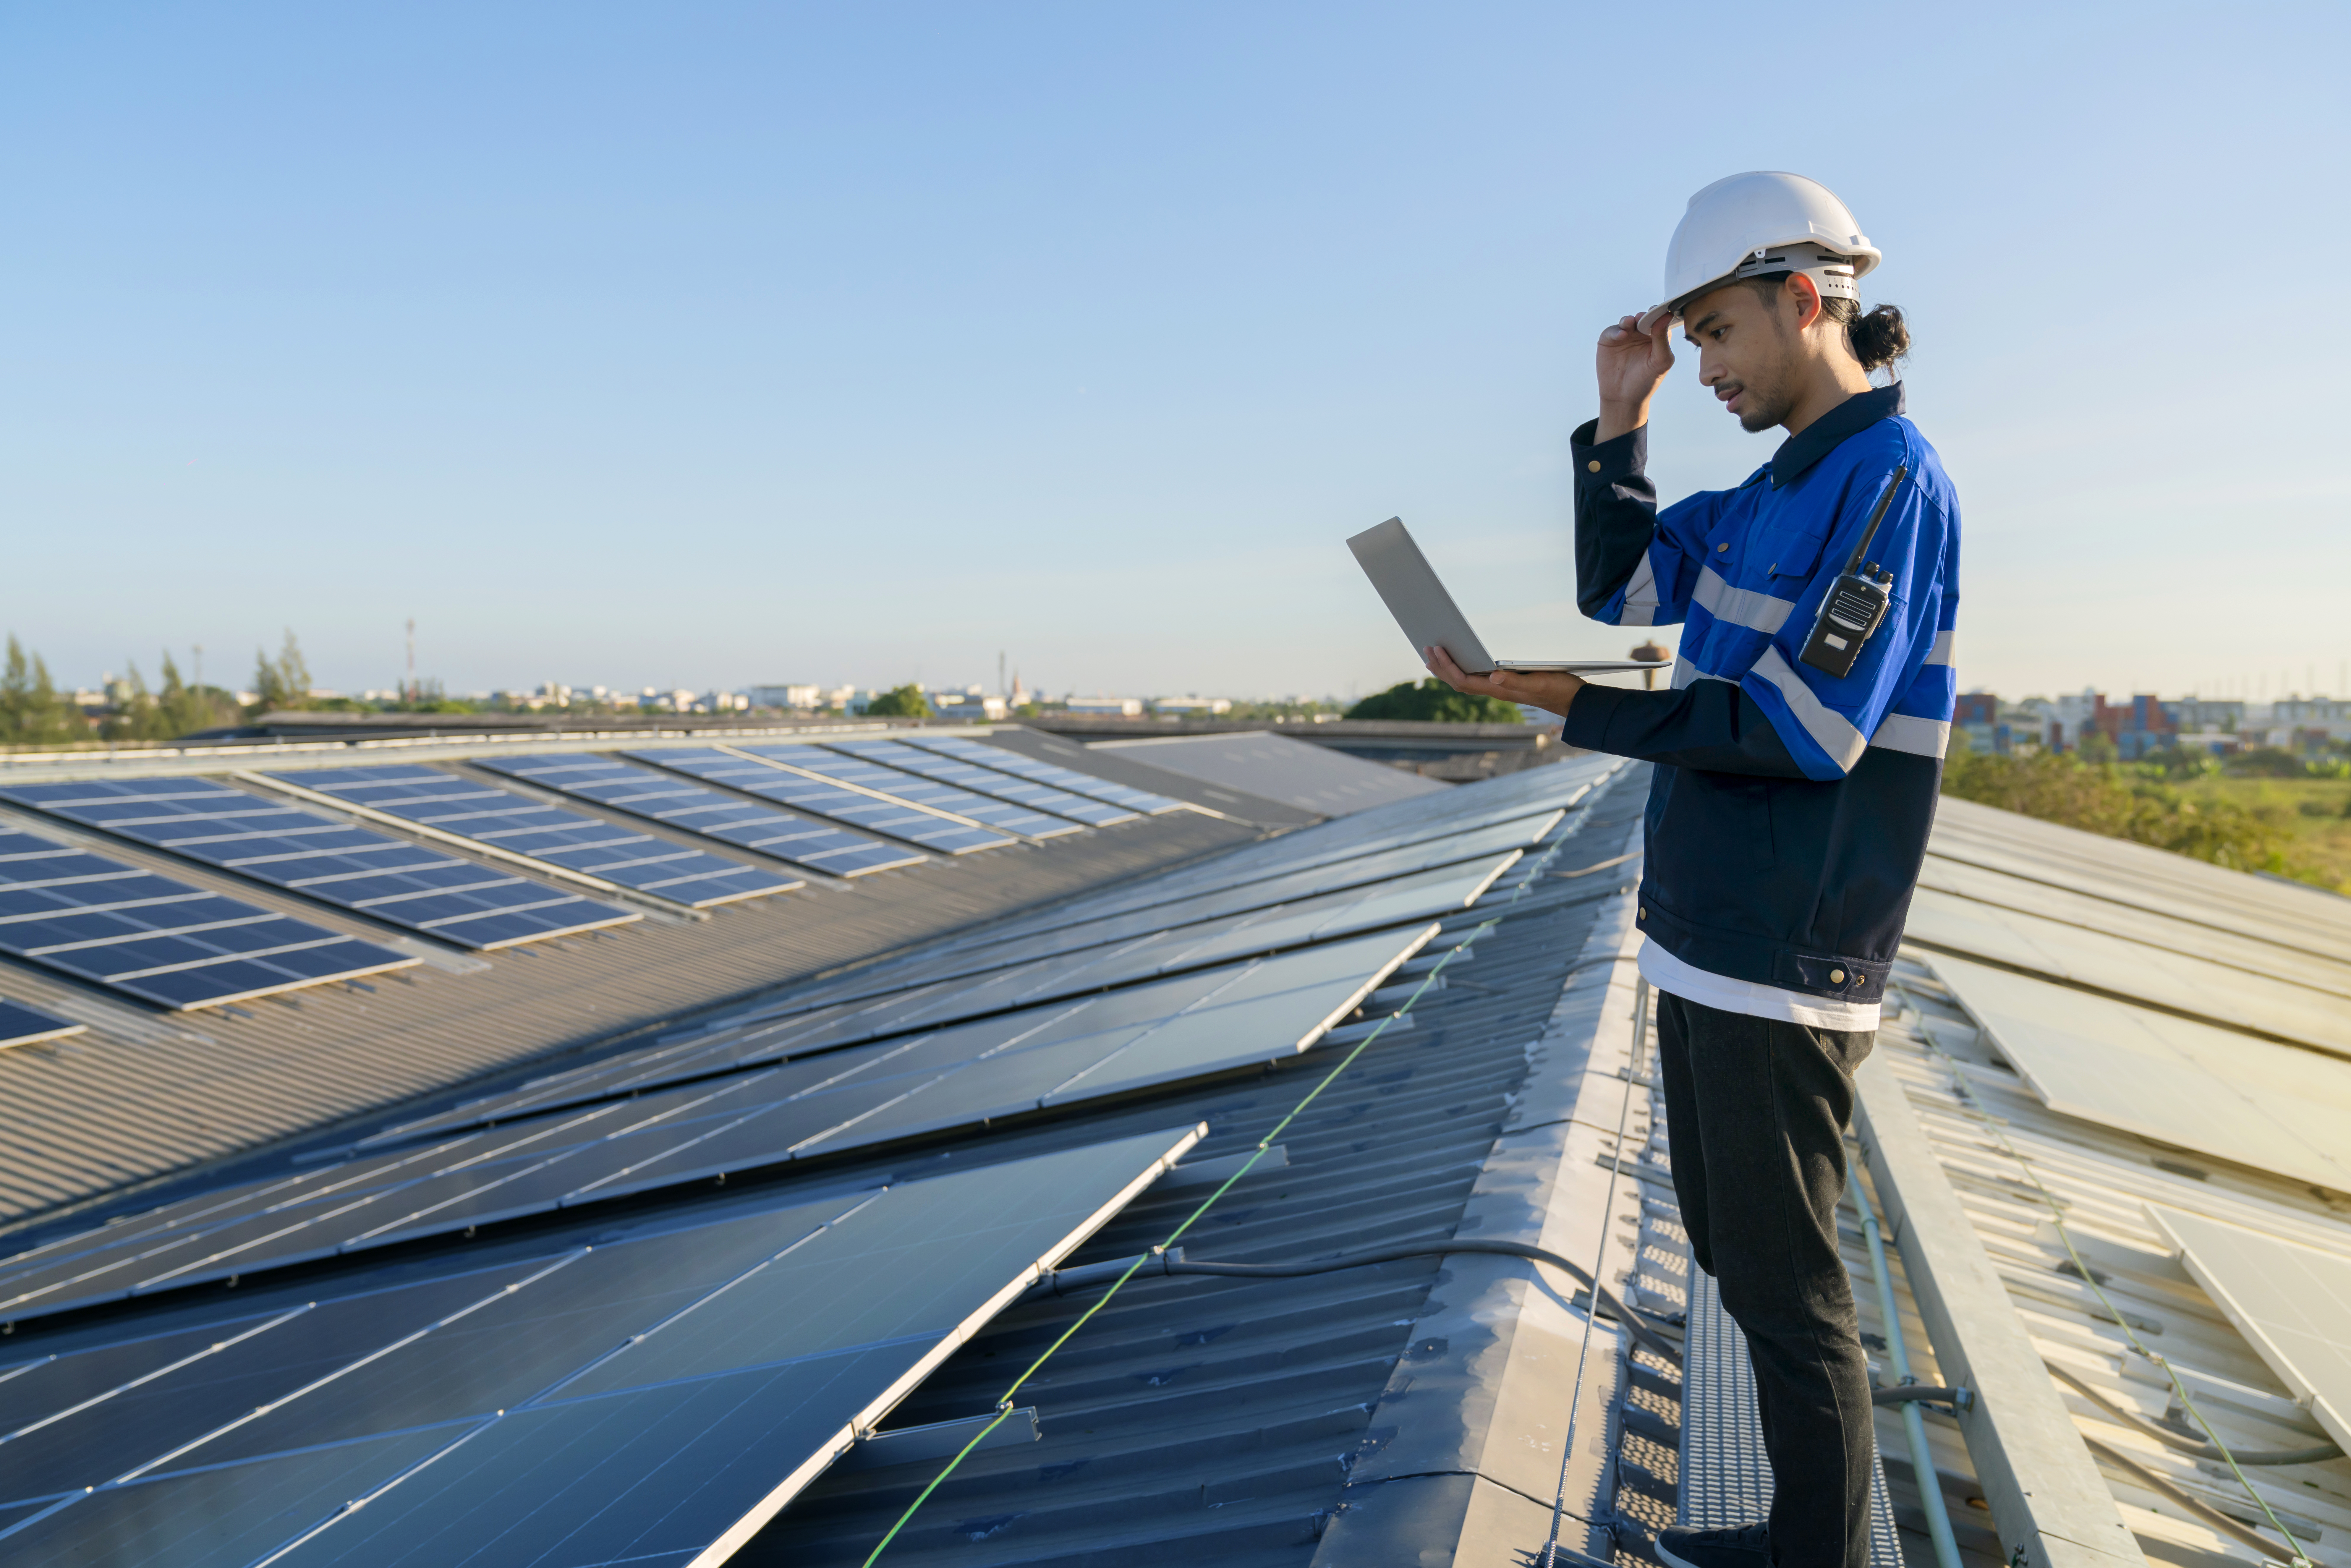 Specialist technician professional engineer with laptop and tablet maintenance checking installing solar roof panel on the factory rooftop under sunlight. Engineers holding tablet check solar roof.